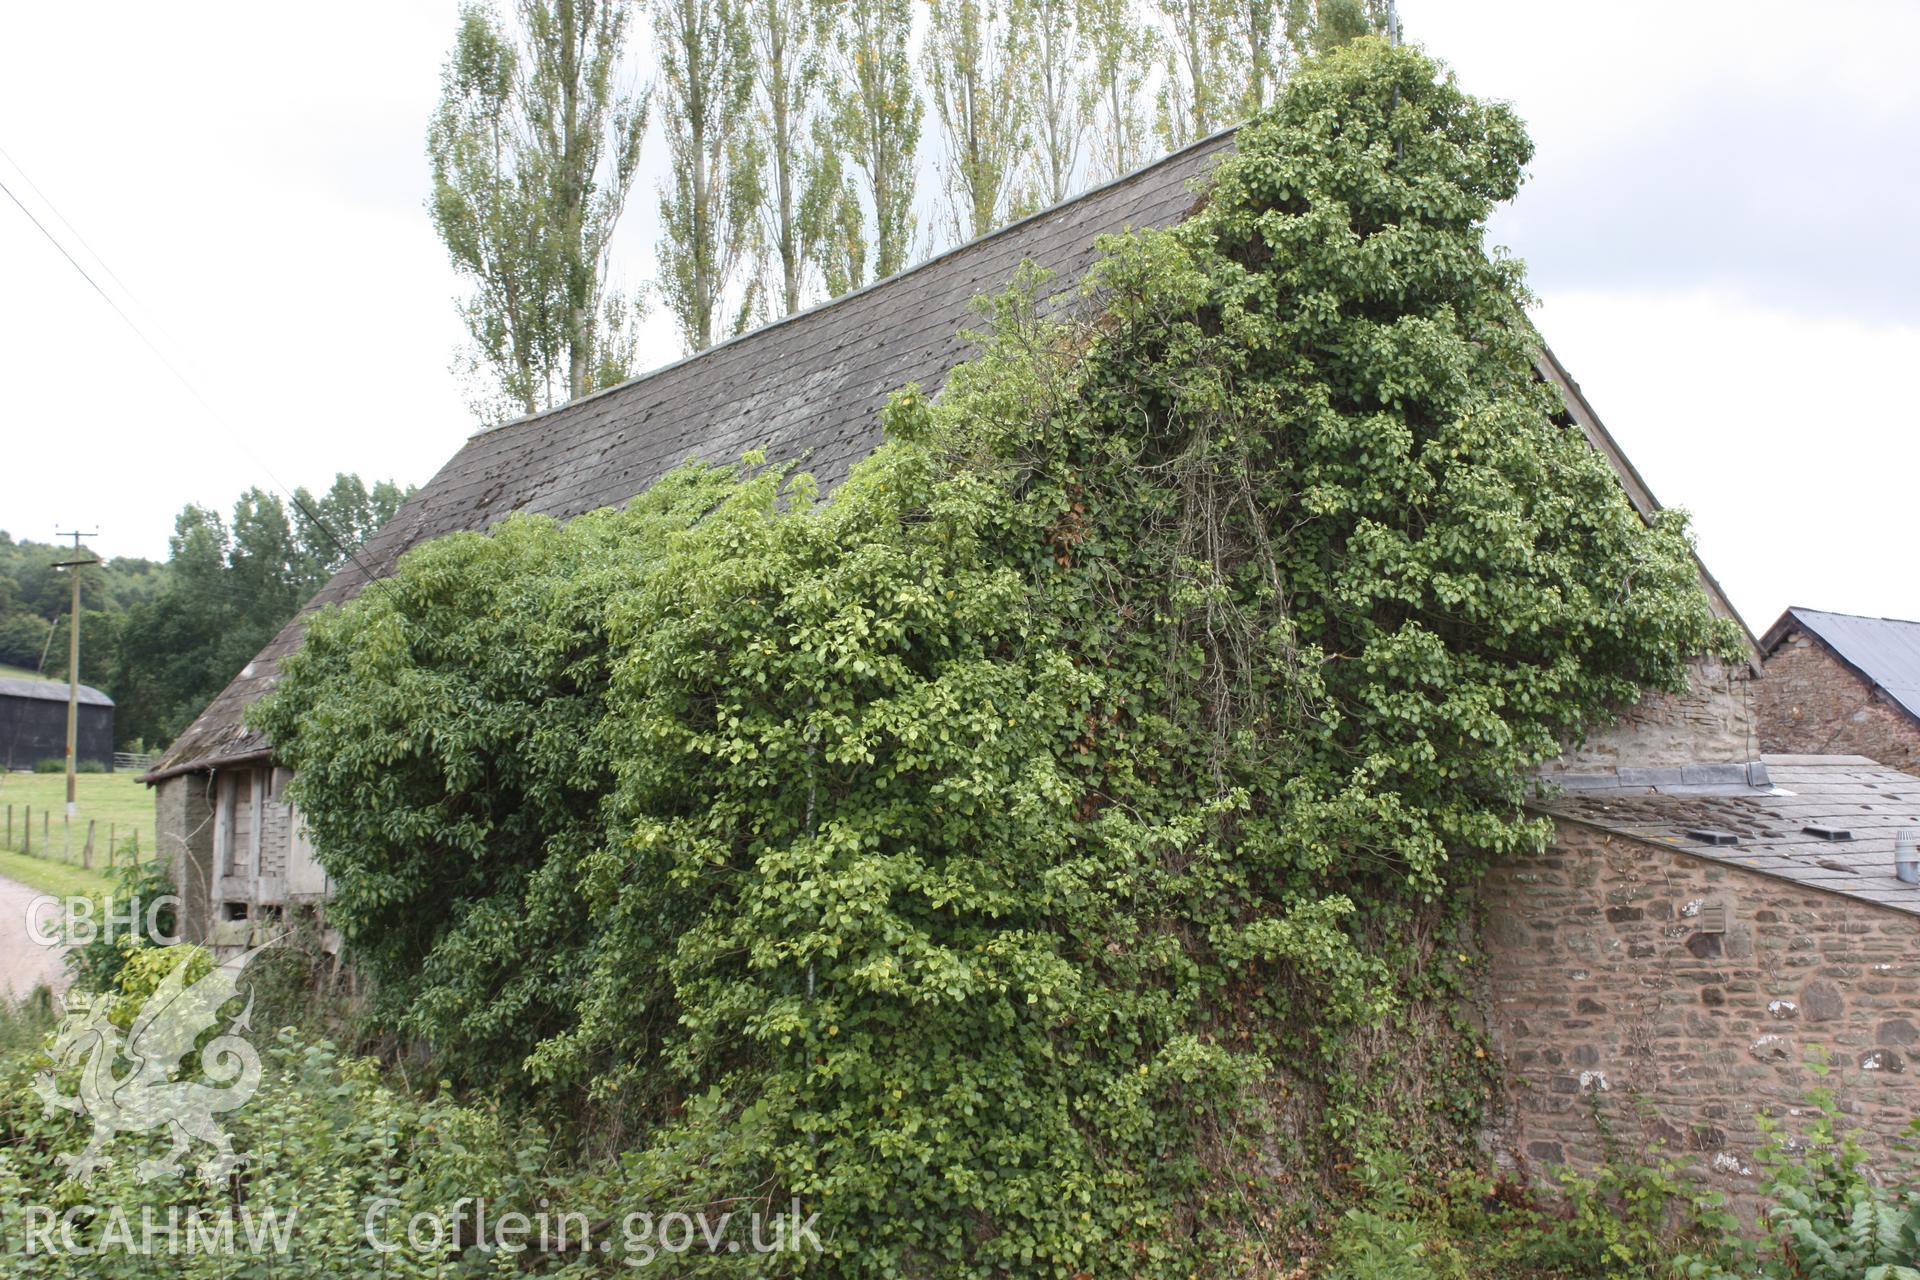 External view of barn at Marian Mawr. Photographic survey of Marian Mawr in Cwm, Denbighshire by Geoff Ward on 20th August 2010.